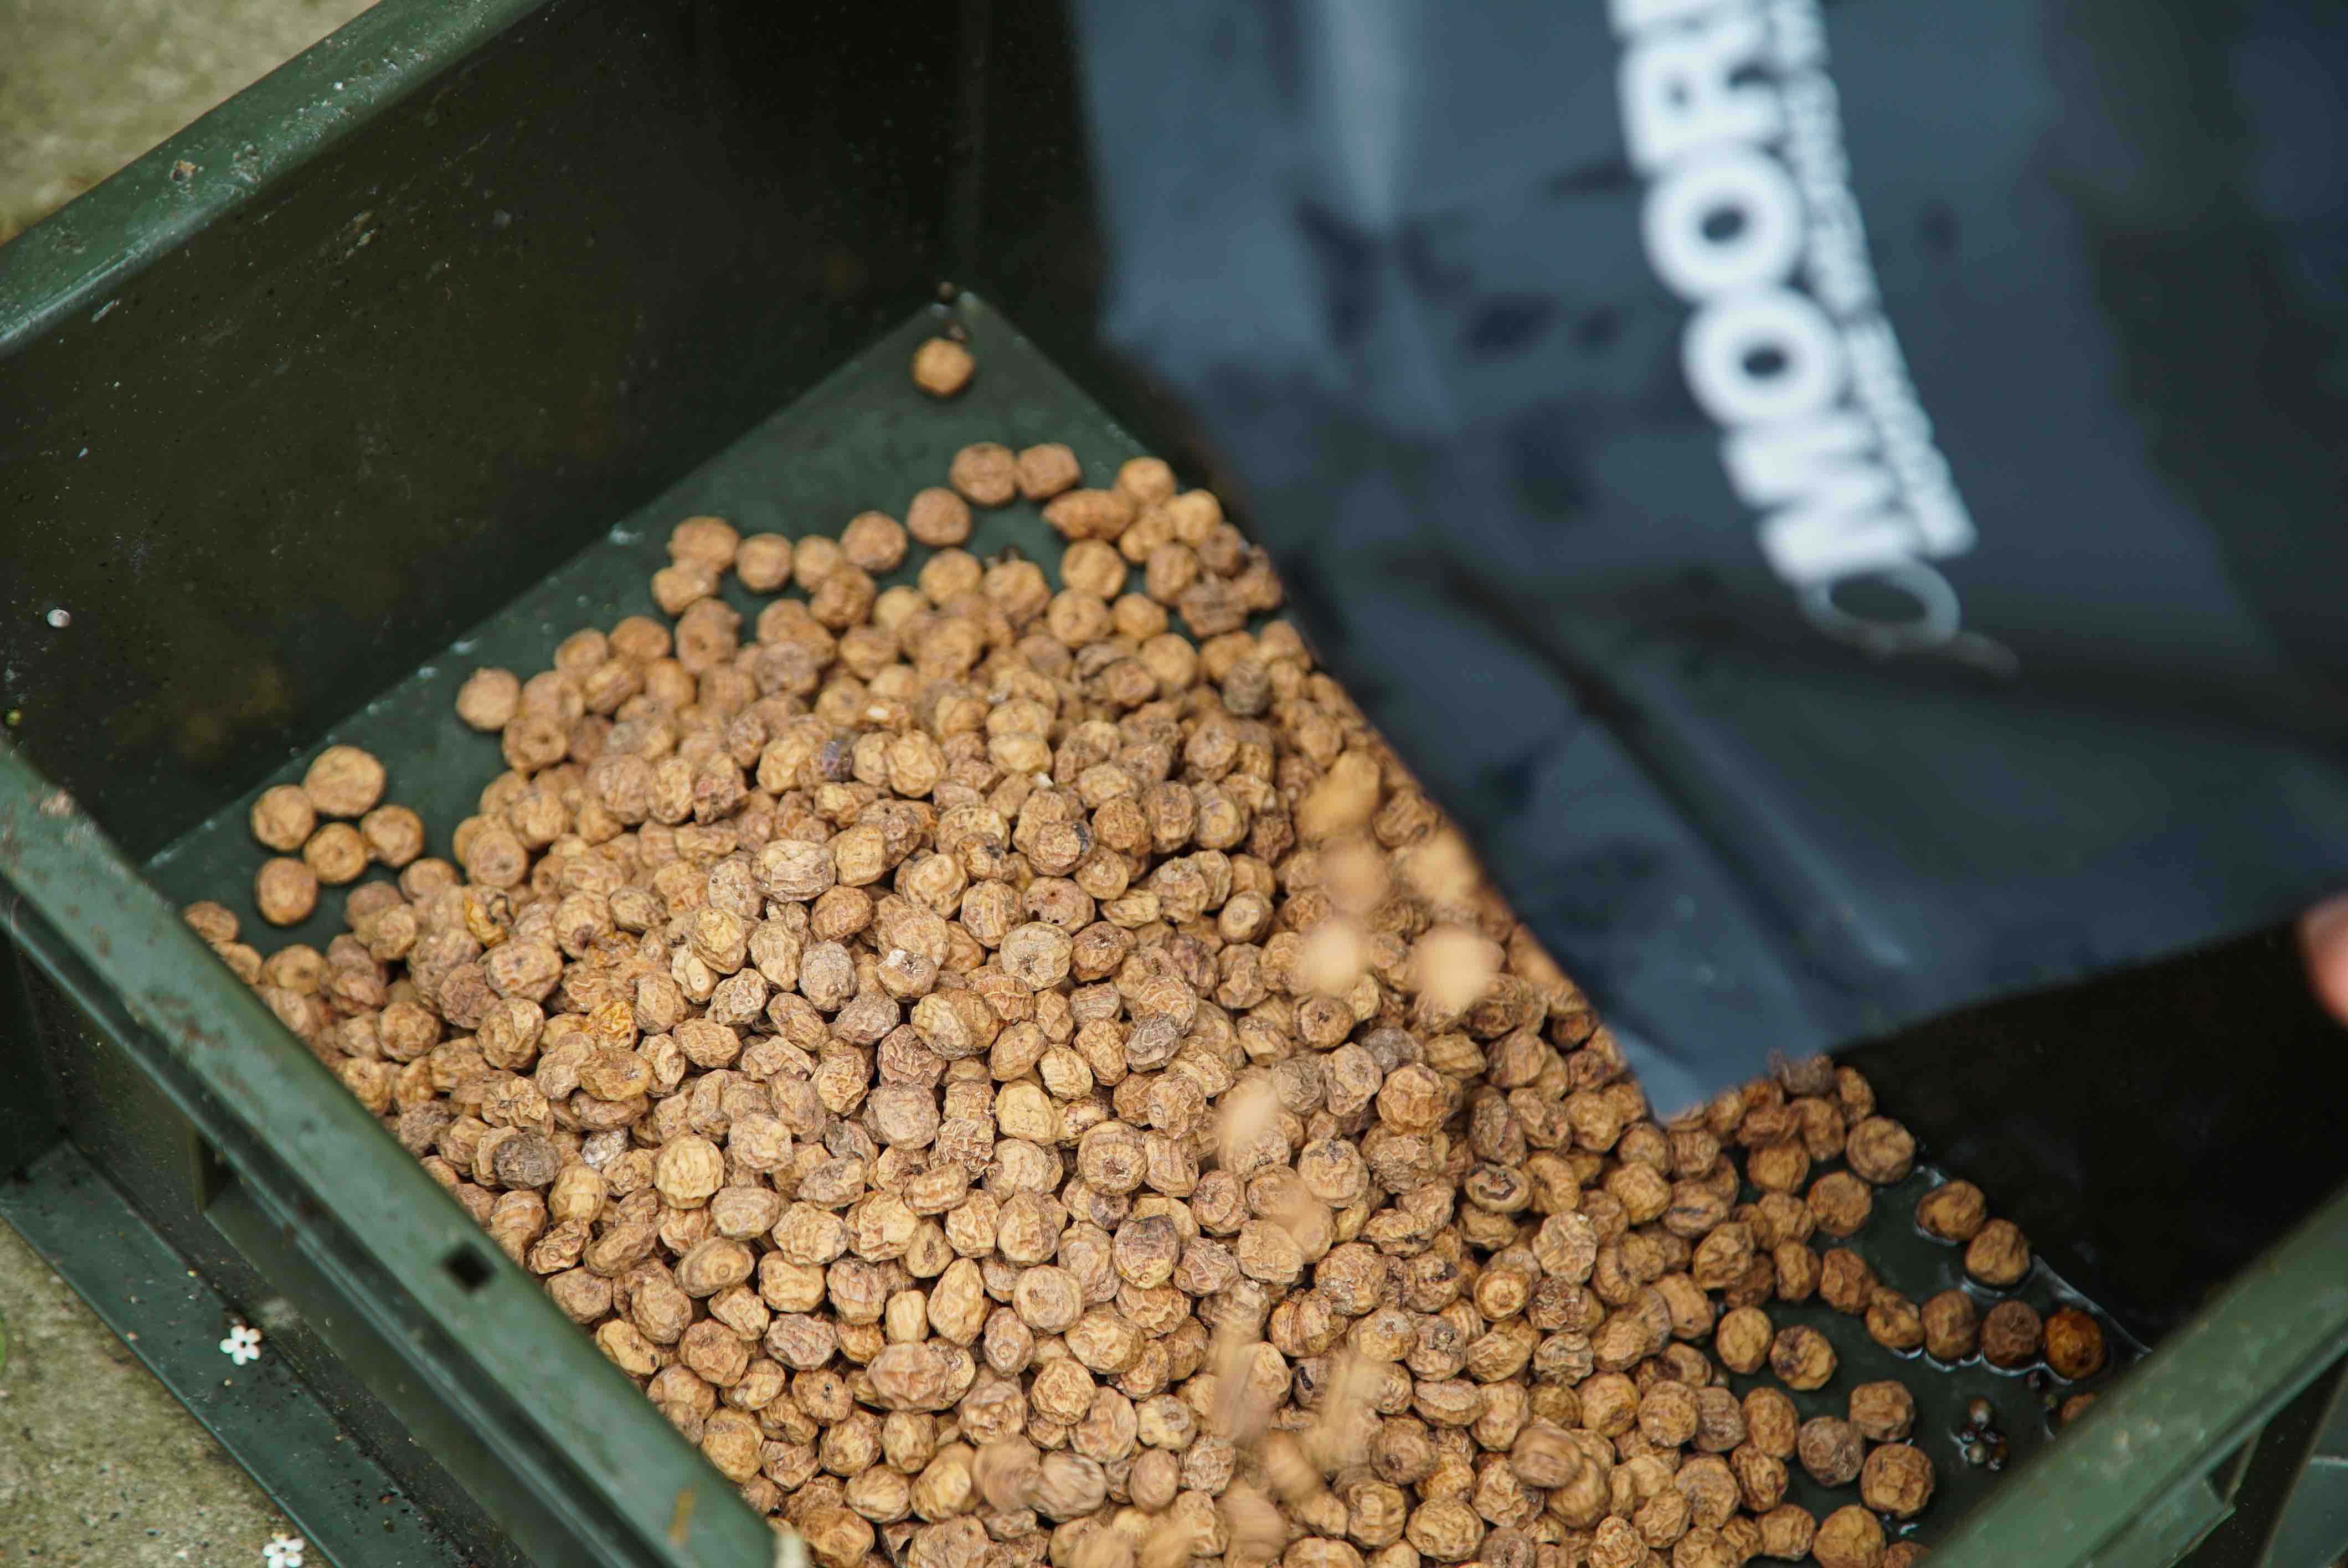 How to prepare tiger nuts for carp fishing bait no soaking or